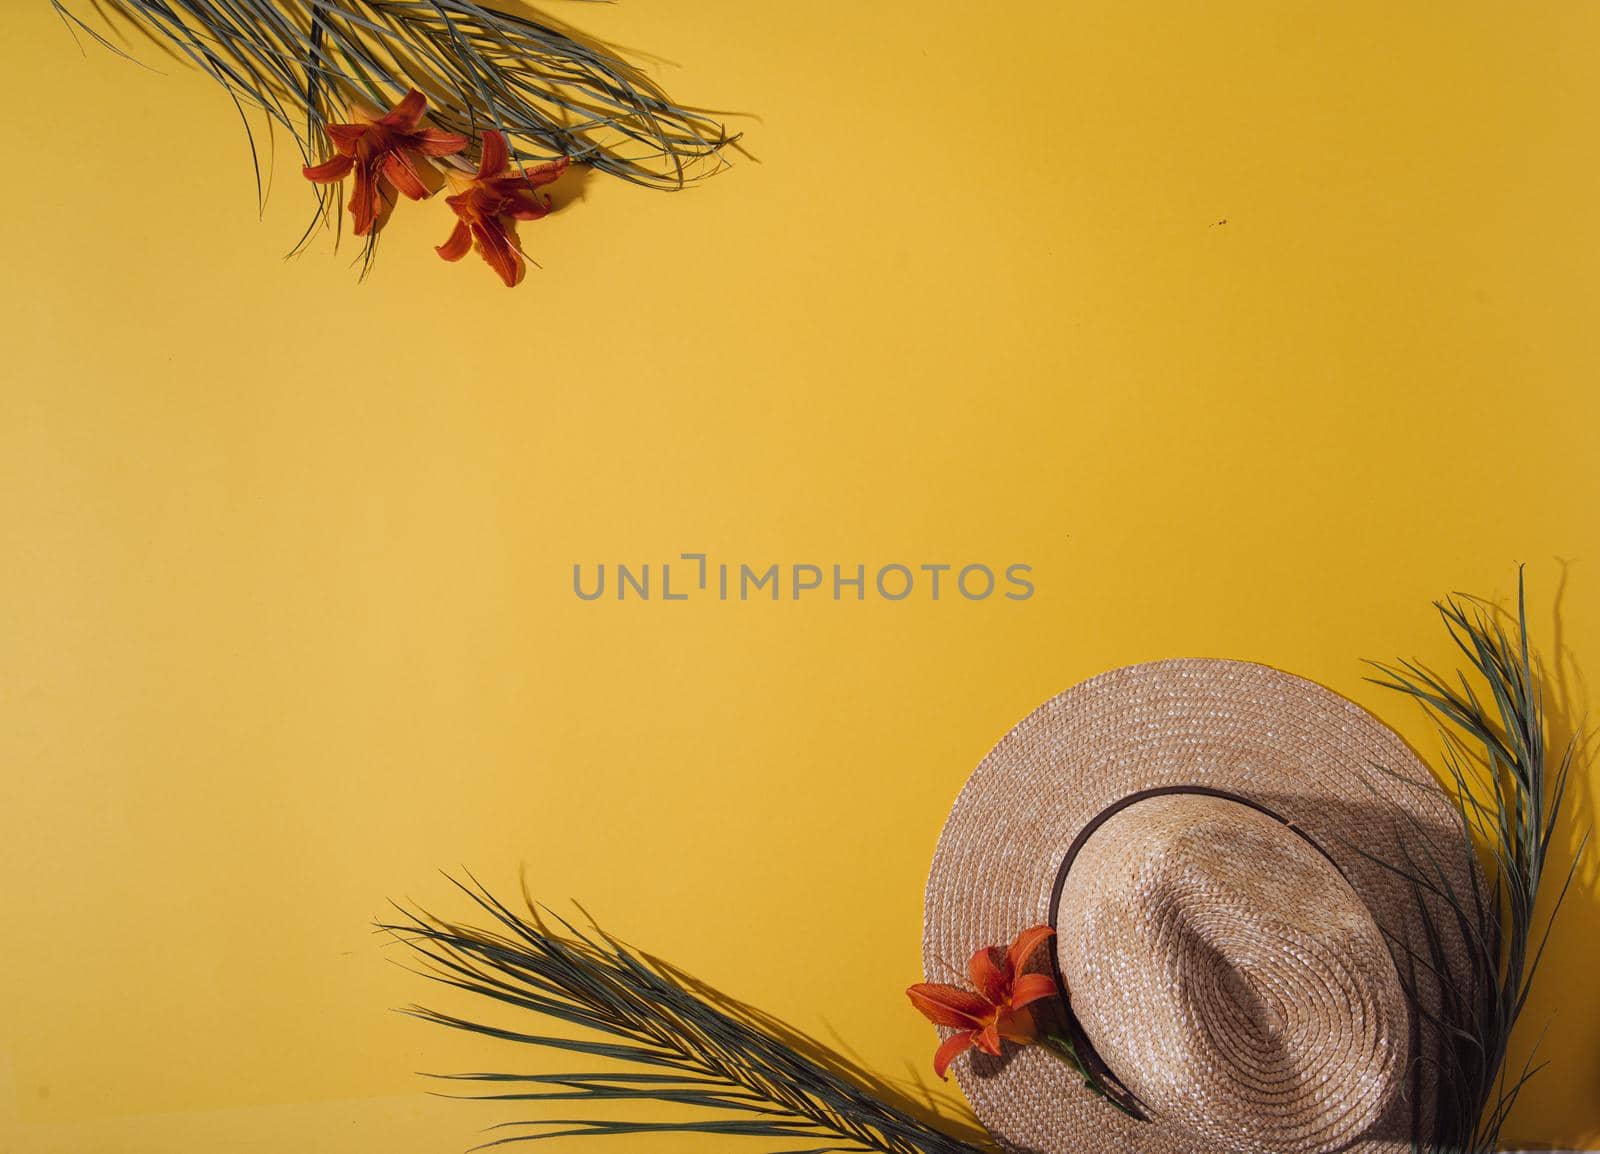 ummer background with straw hat and bag and palm leaves. High quality photo